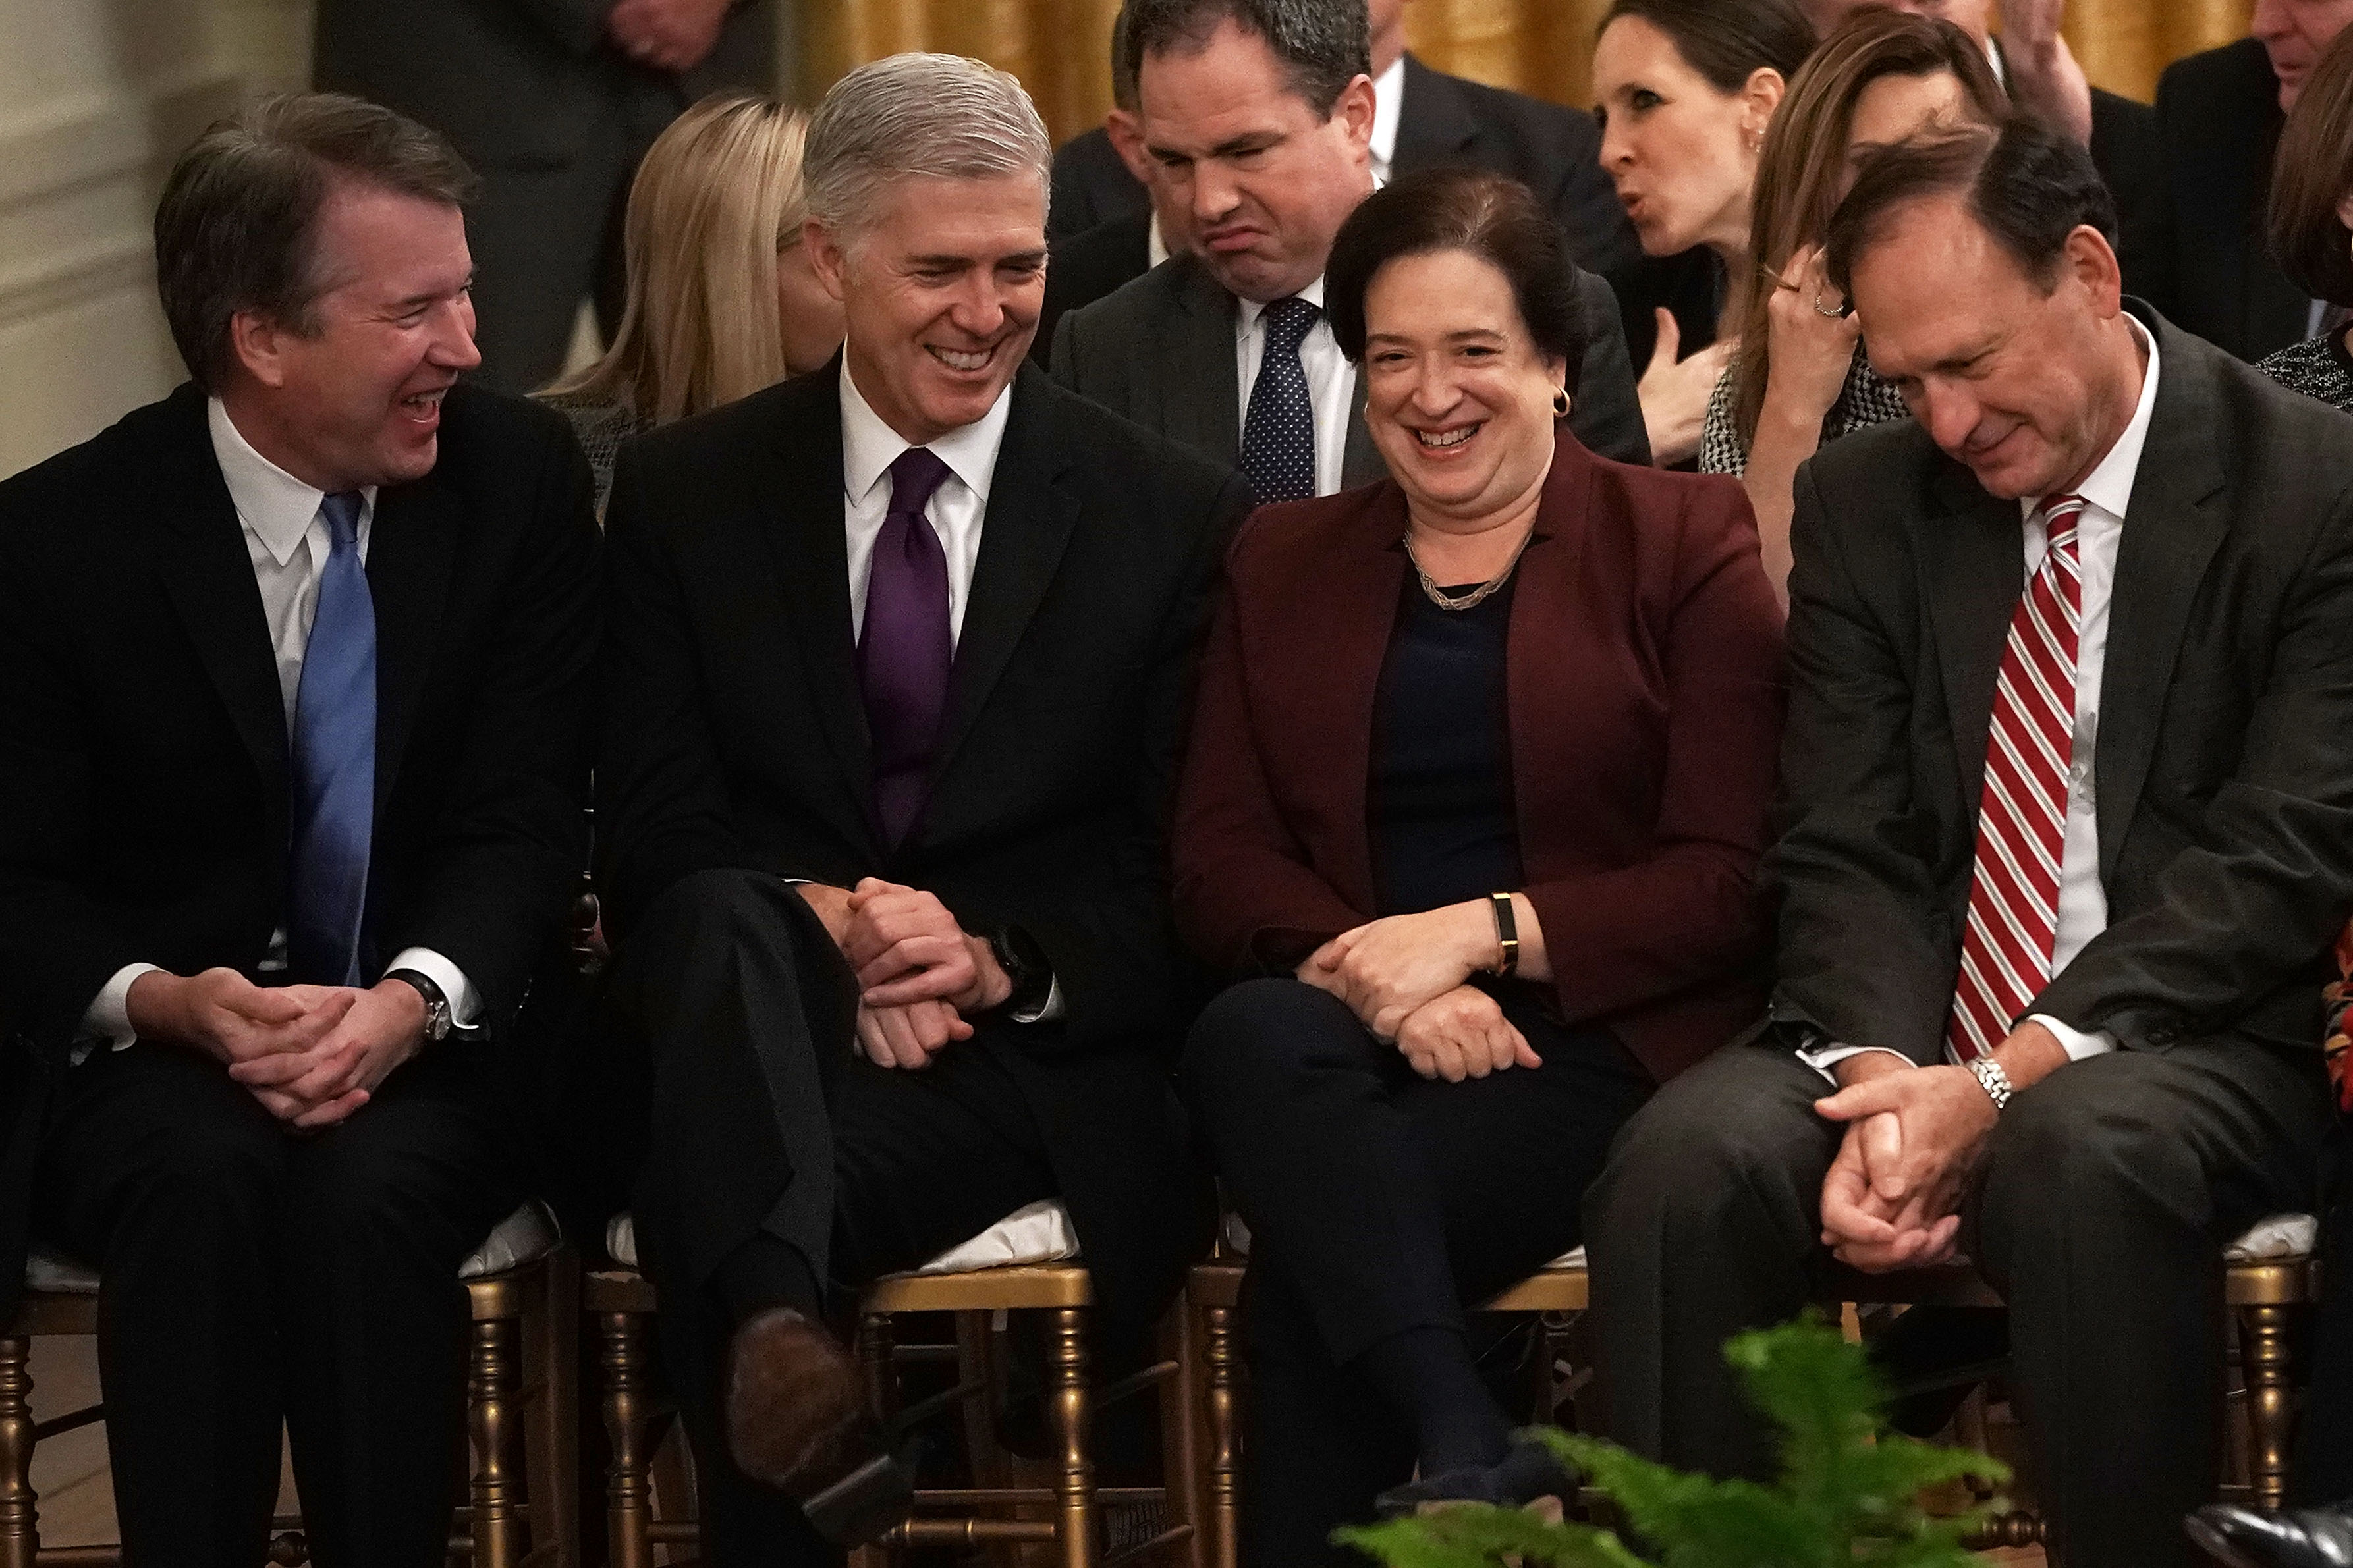 (L-R) Justice Brett Kavanaugh, Neil Gorsuch, Elena Kagan, and Samuel Alito attend a presidential Medal of Freedom ceremony at the White House on November 16, 2018. (Alex Wong/Getty Images)